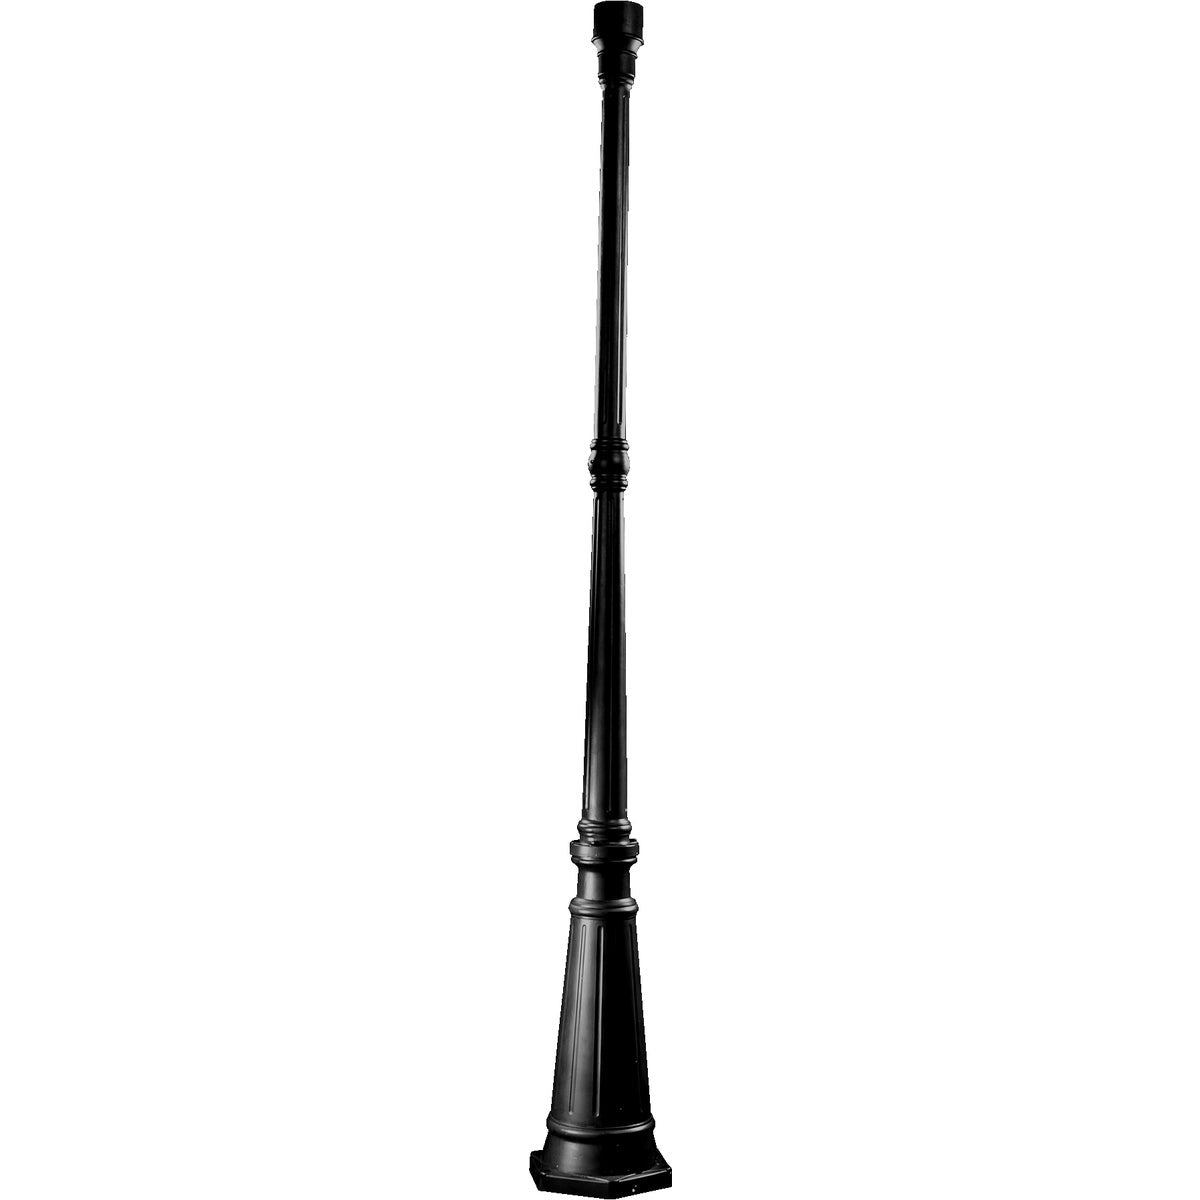 Outdoor Lamp Post with cast aluminum base, 73" tall. Compatible with 3" outdoor post lights. Durable and weather-resistant for wet locations. Easy ground mount installation. Add security to your lawn, patio, or porch. UL Listed. Wet Location safety rating. Gloss Black finish. 9.5"W x 73"H.